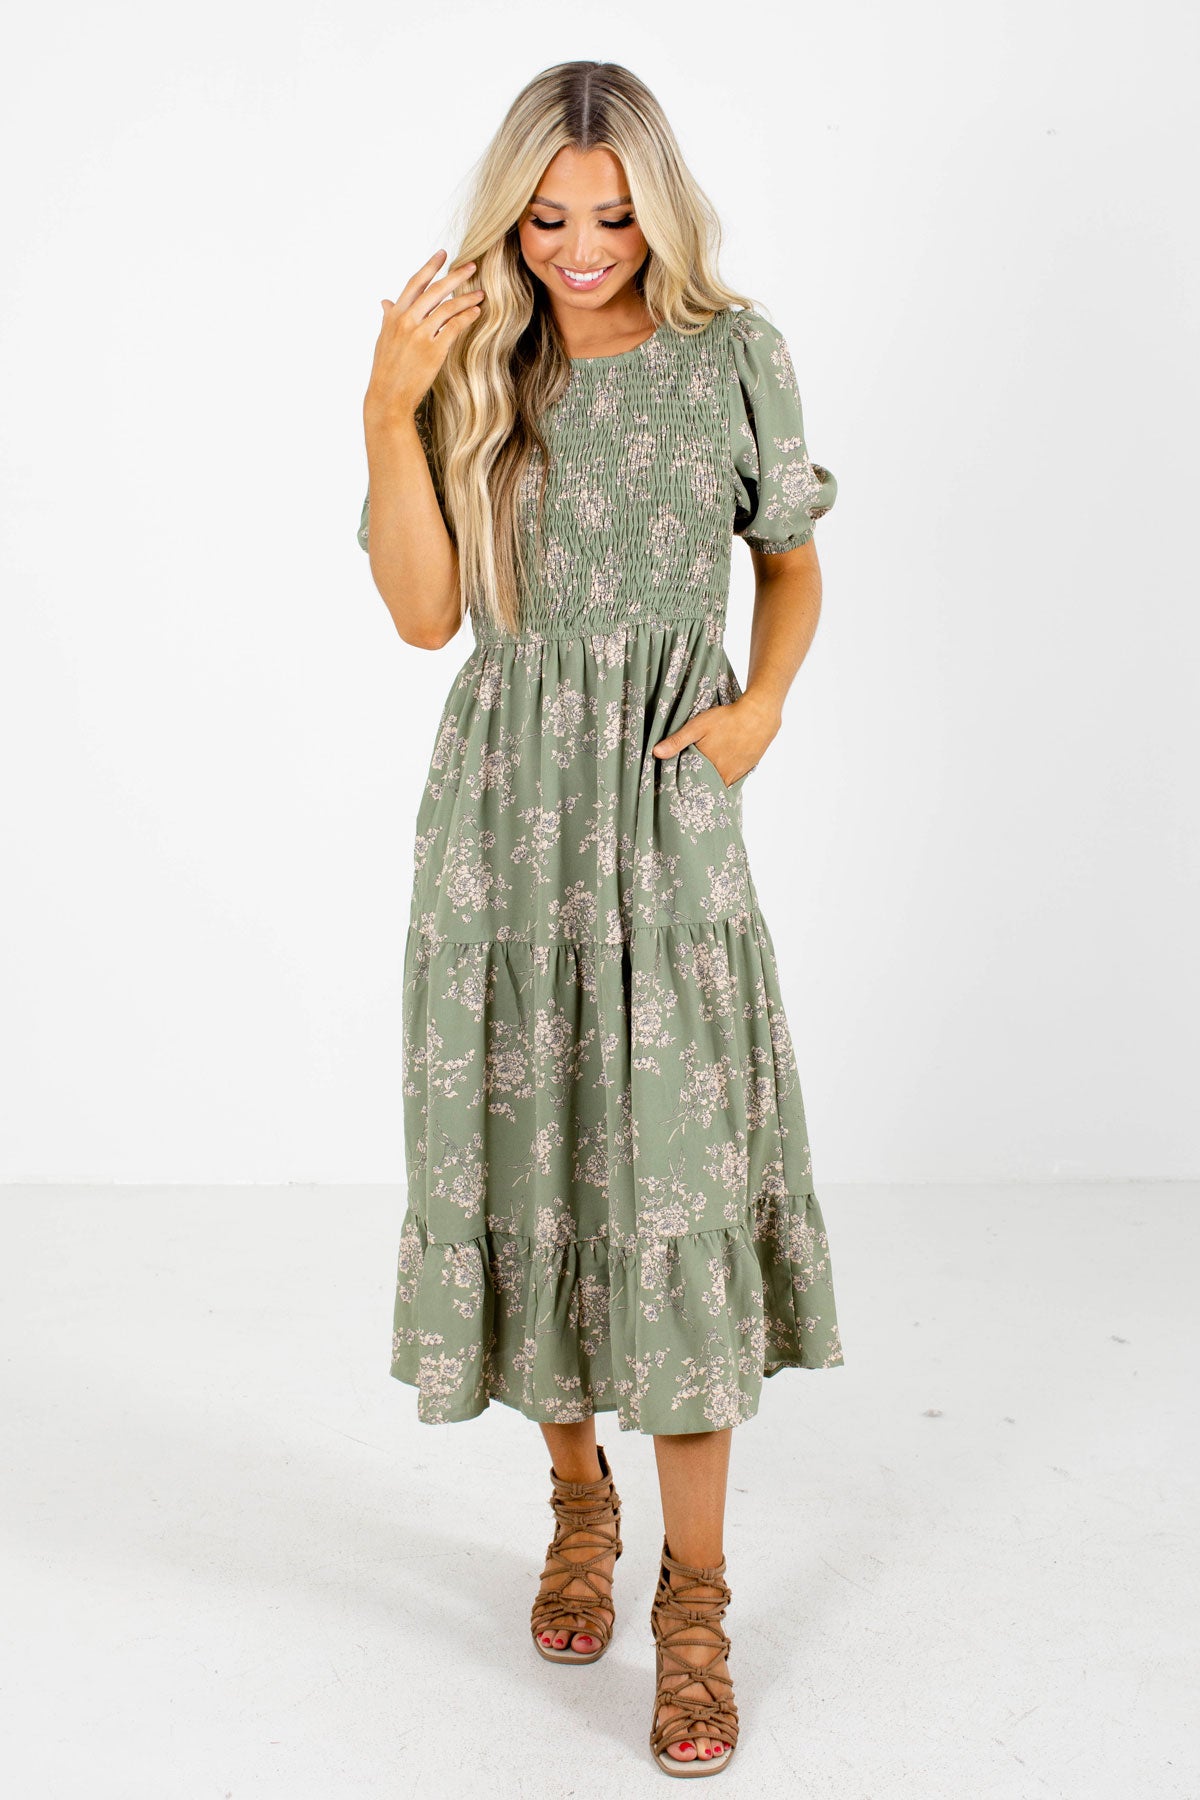 Green Lightweight Material Midi Dress Boutique Clothing for Women